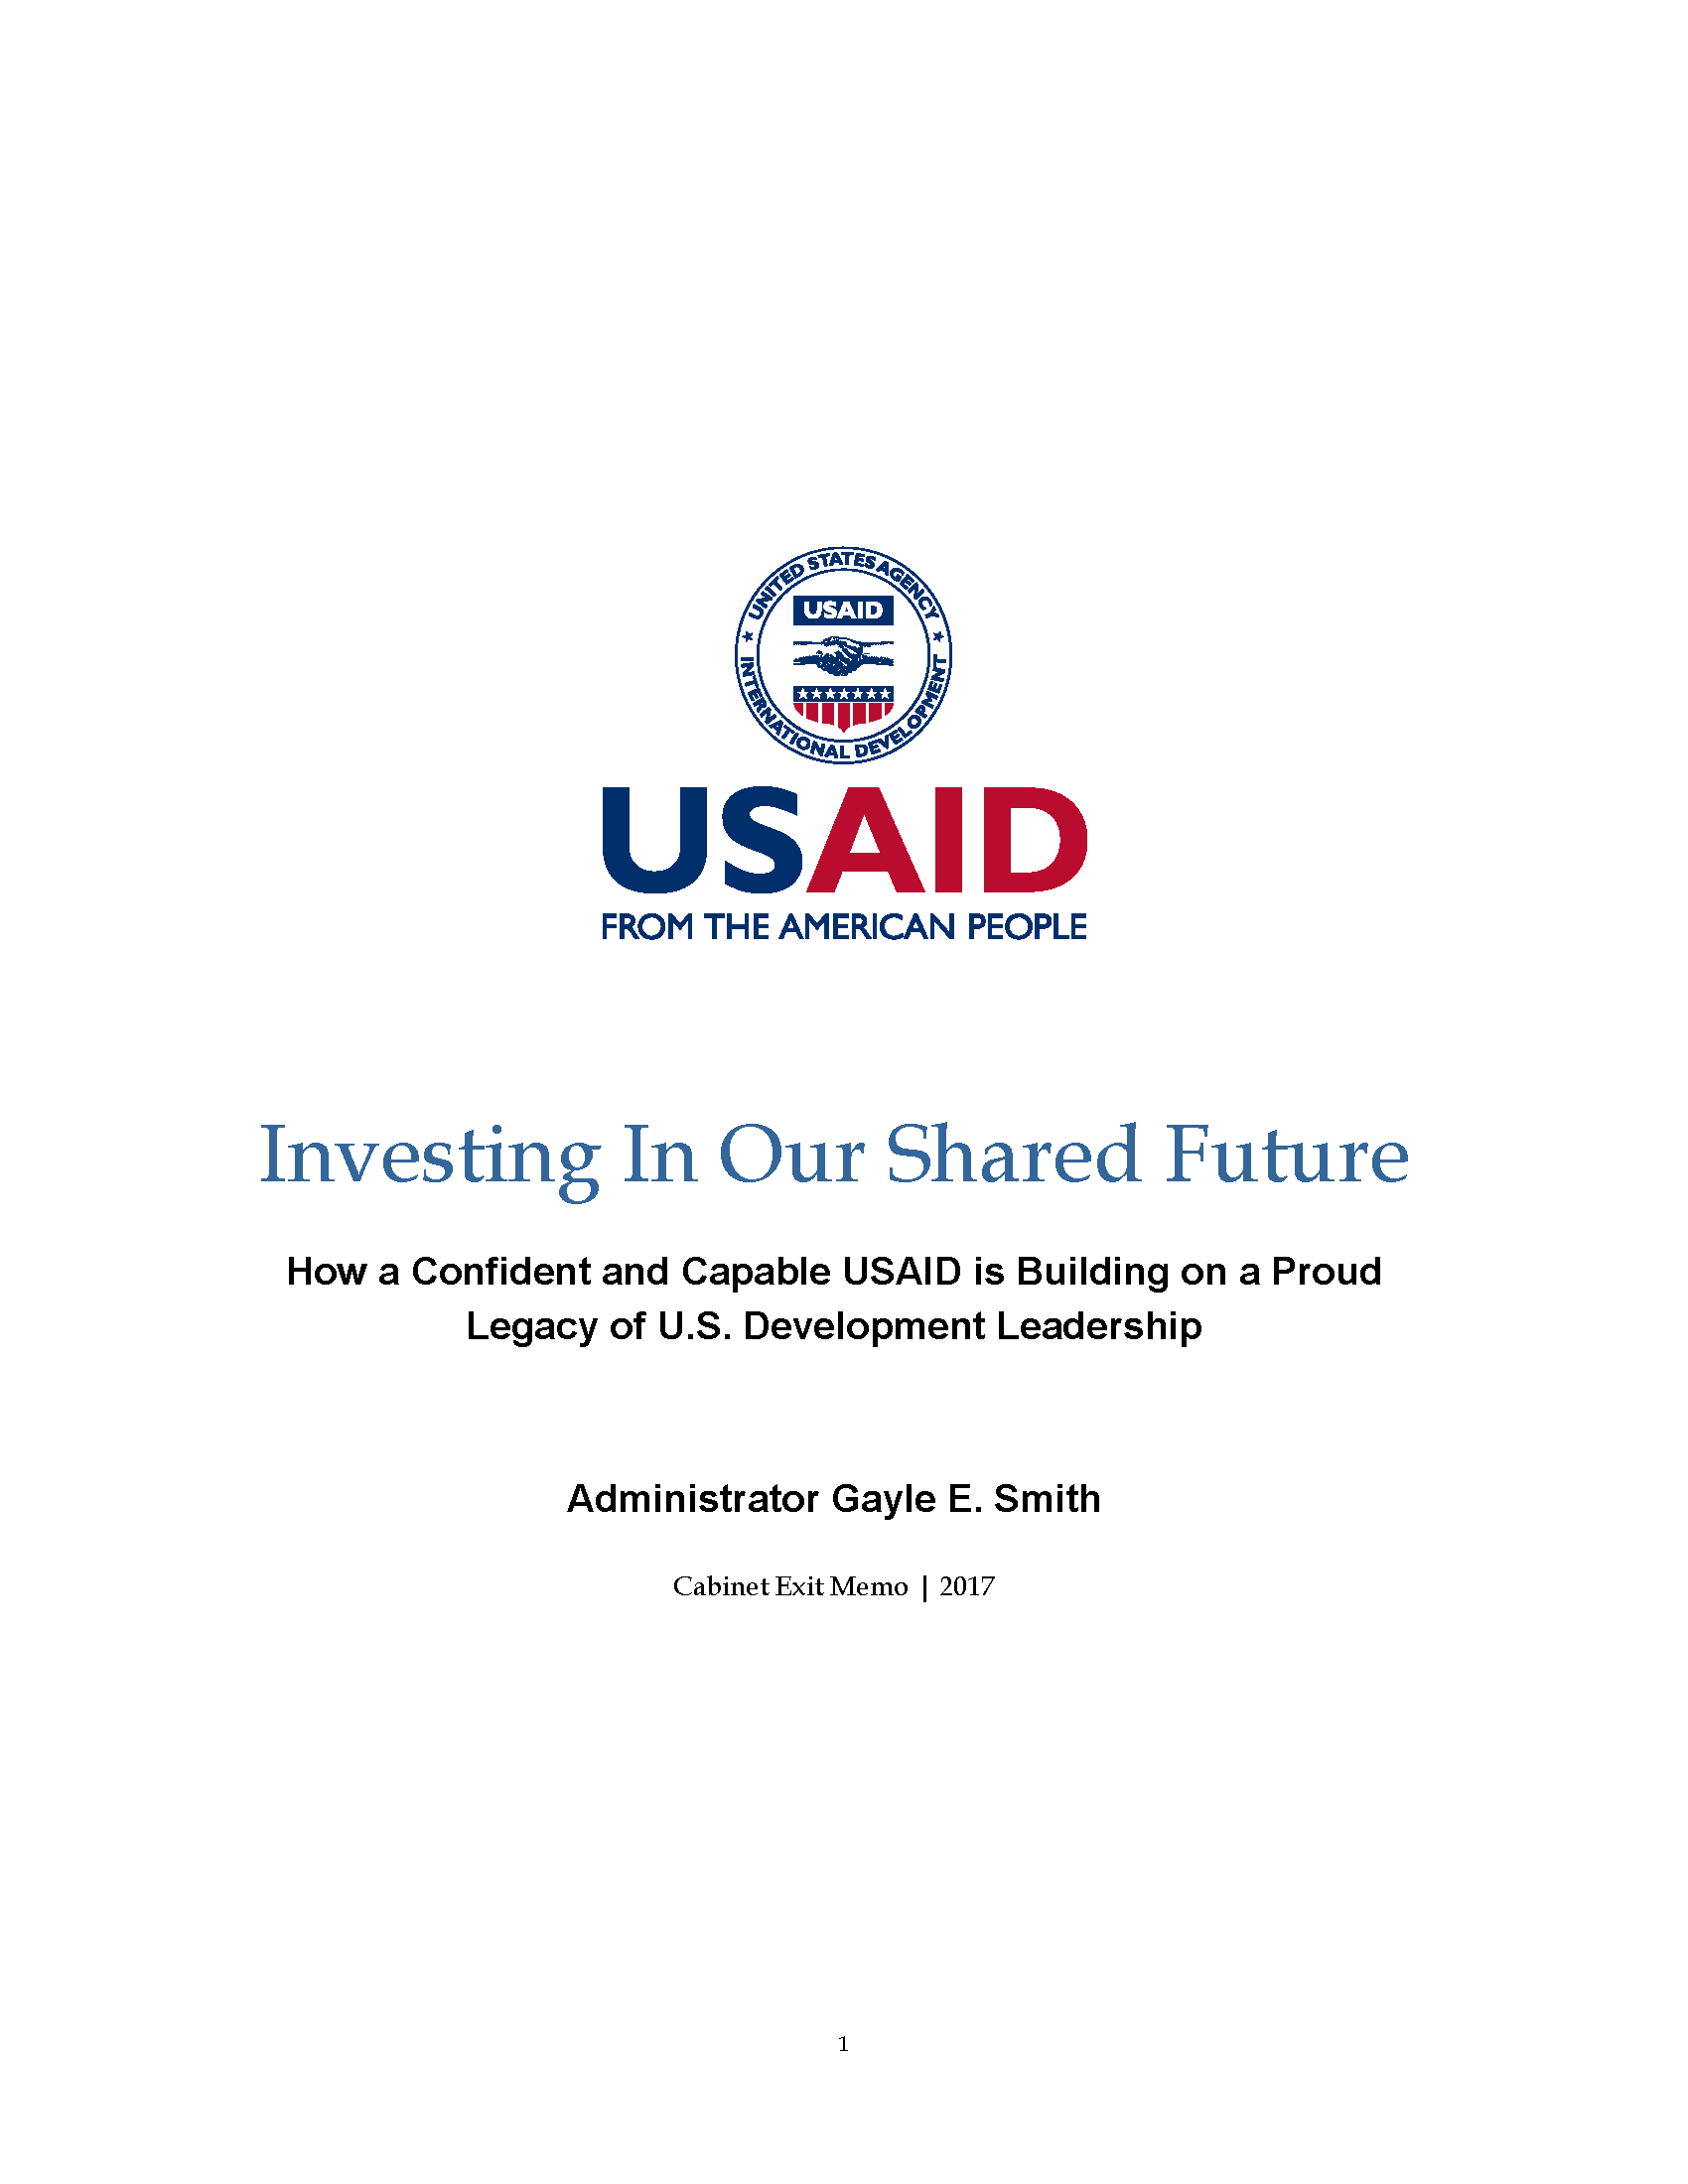 Investing in Our Shared Future